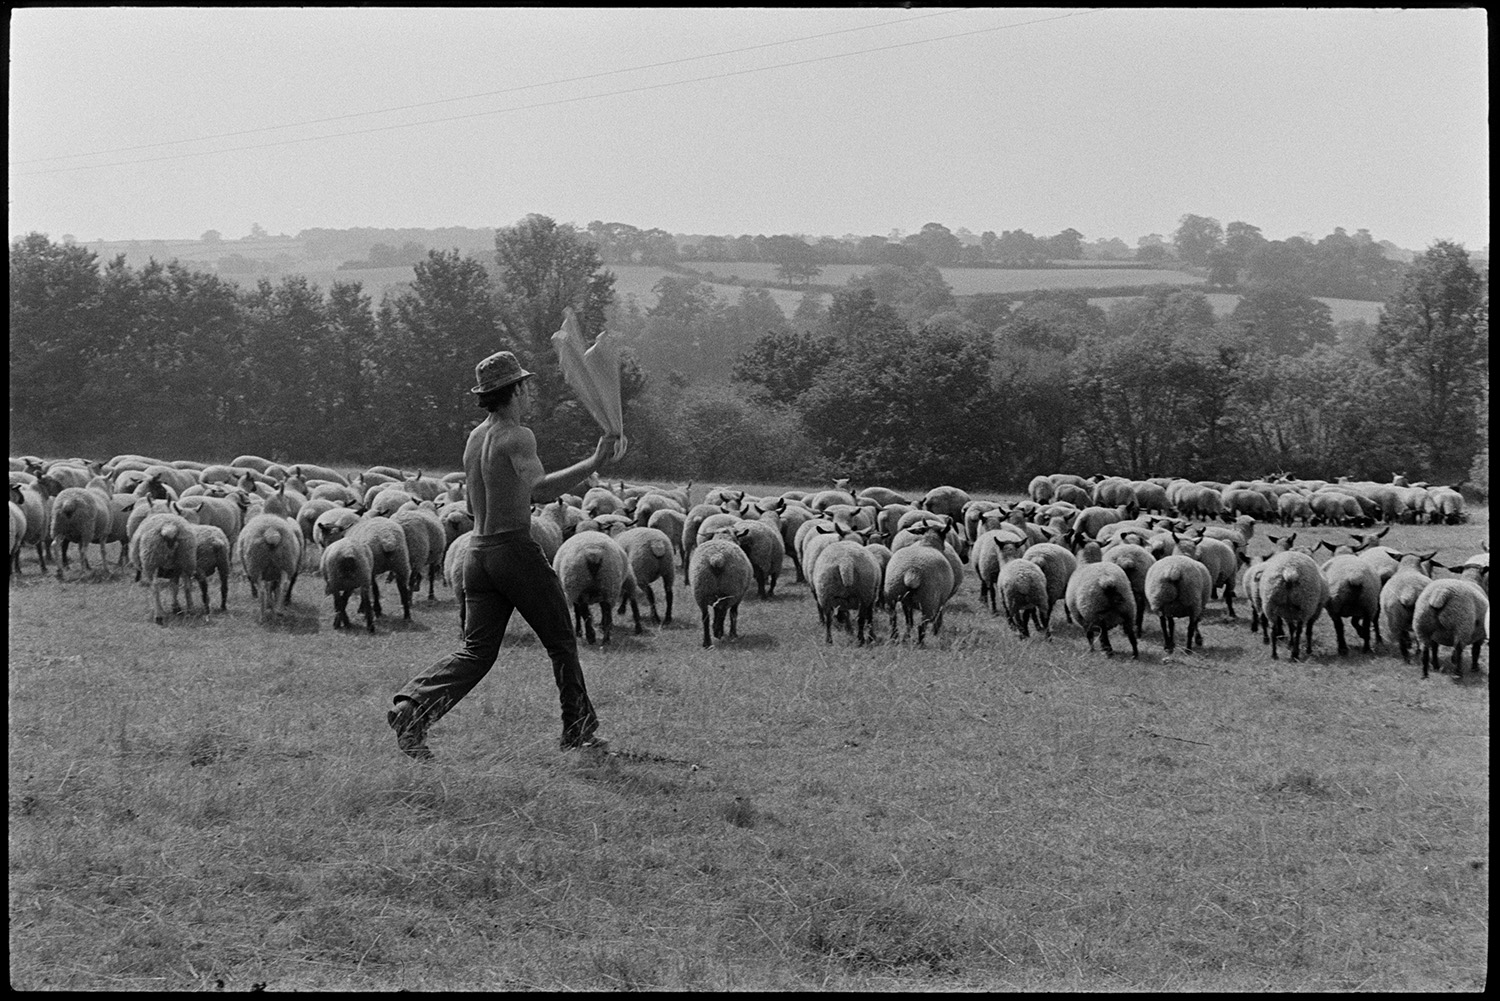 Shepherds dipping & herding sheep. 
[David Ward herding a flock of sheep in a farm at Parsonage, Iddesleigh. He is waving his t-shirt in the air.]